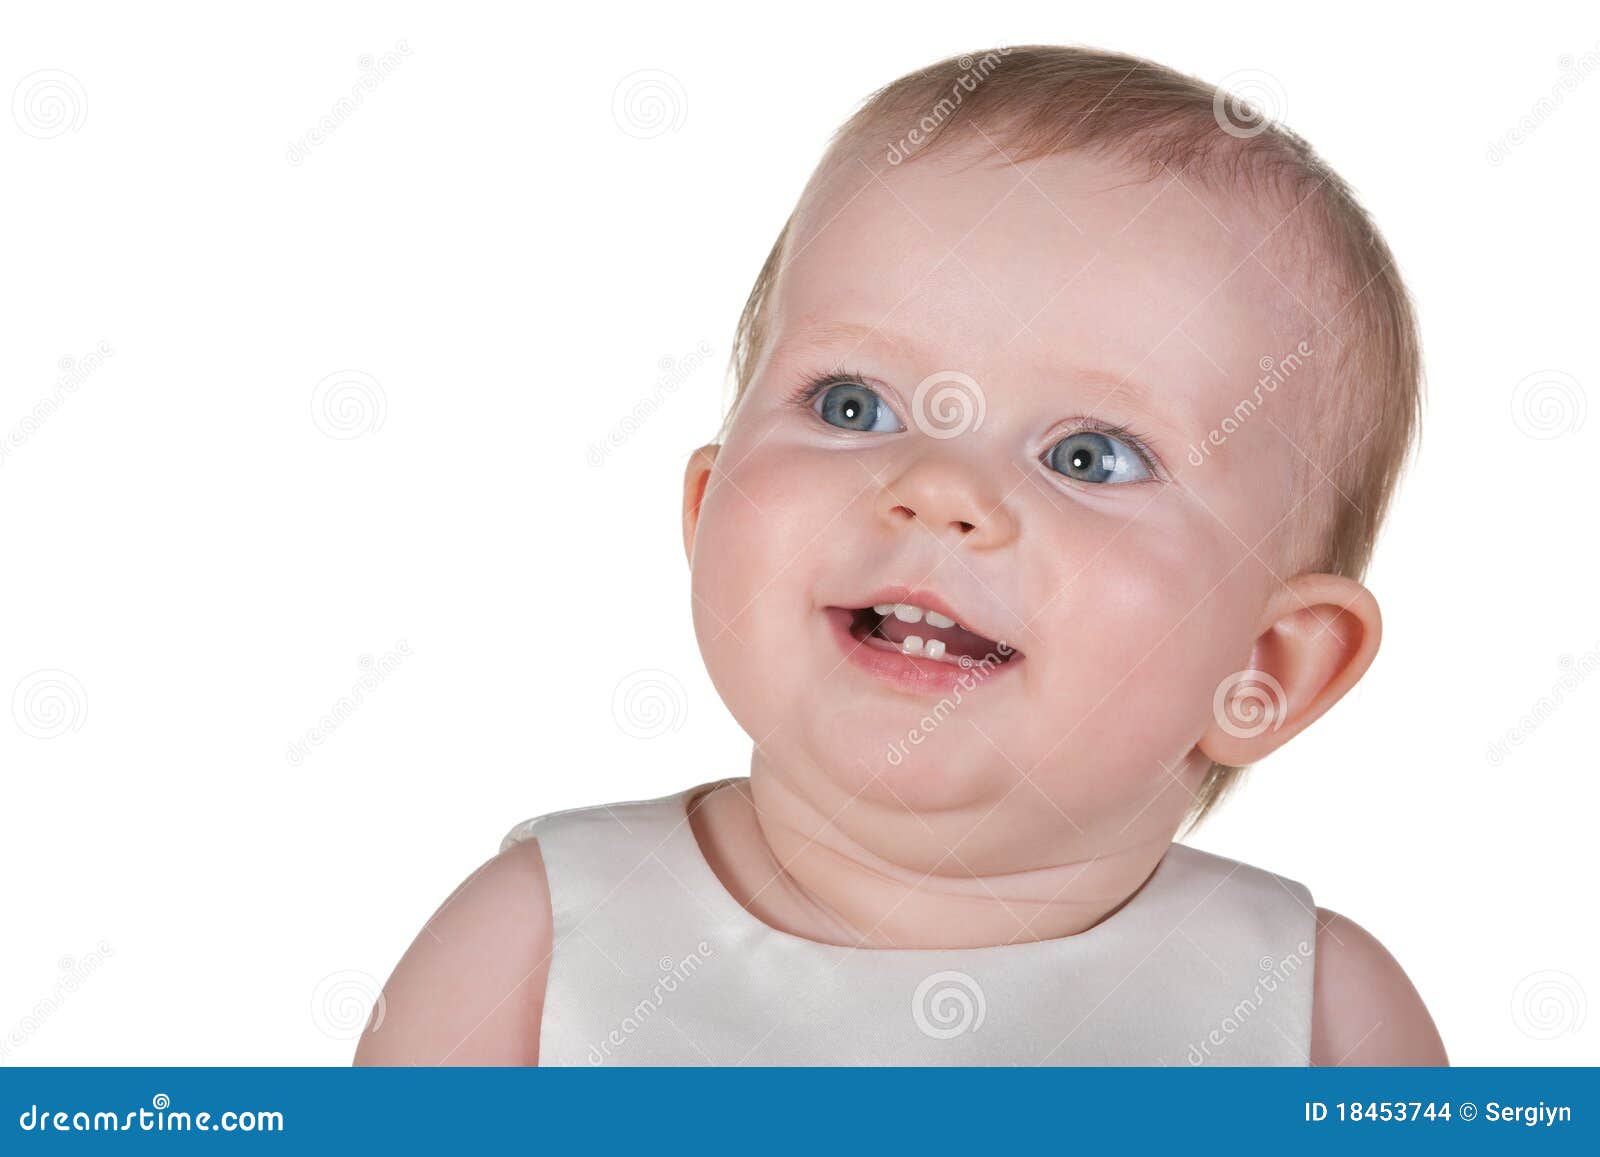 Charming Baby Showing First Teeth Stock Photo - Image of teeth, girl ...